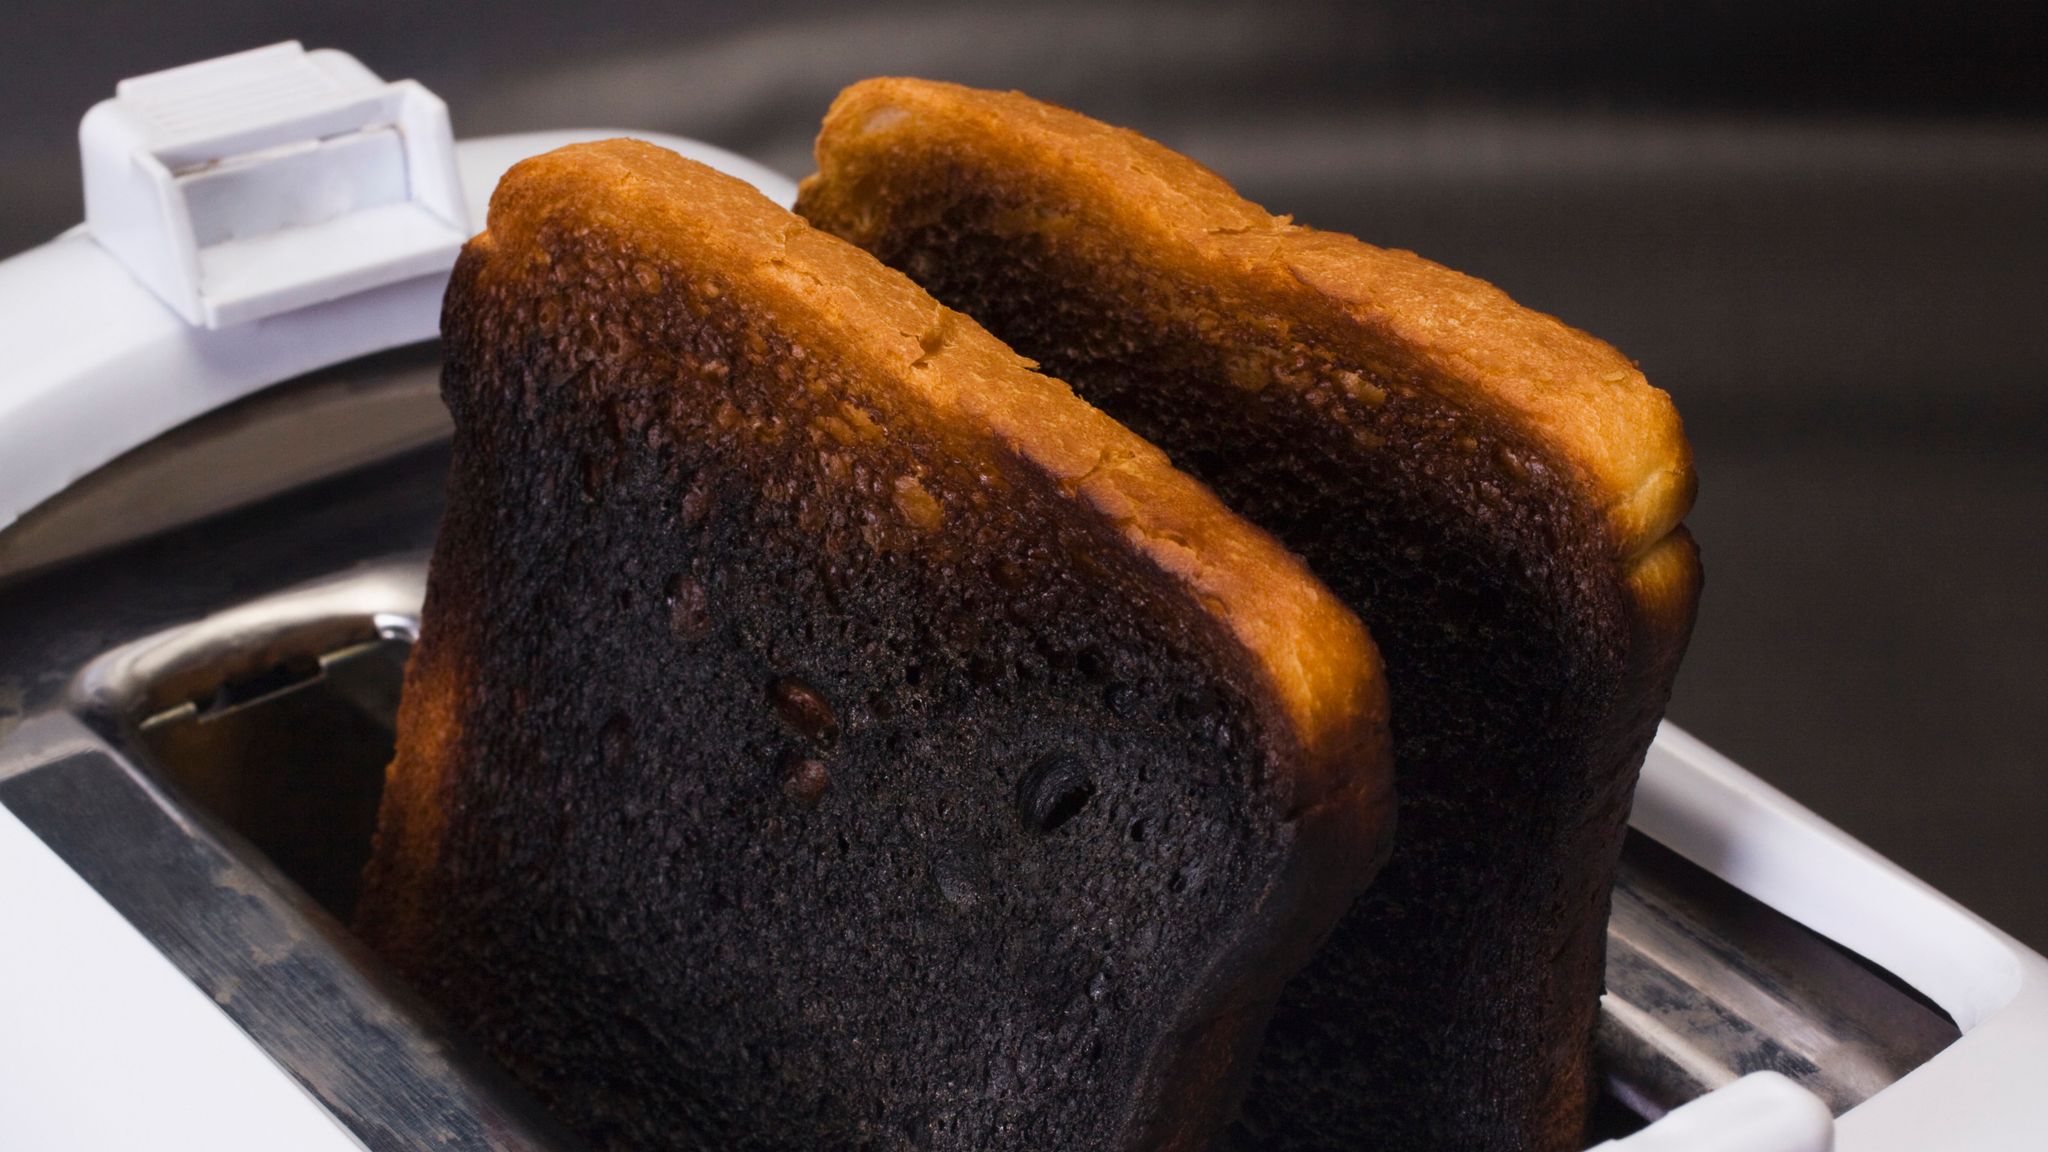 Eating burnt toast 'may increase cancer risk' | UK News | Sky News